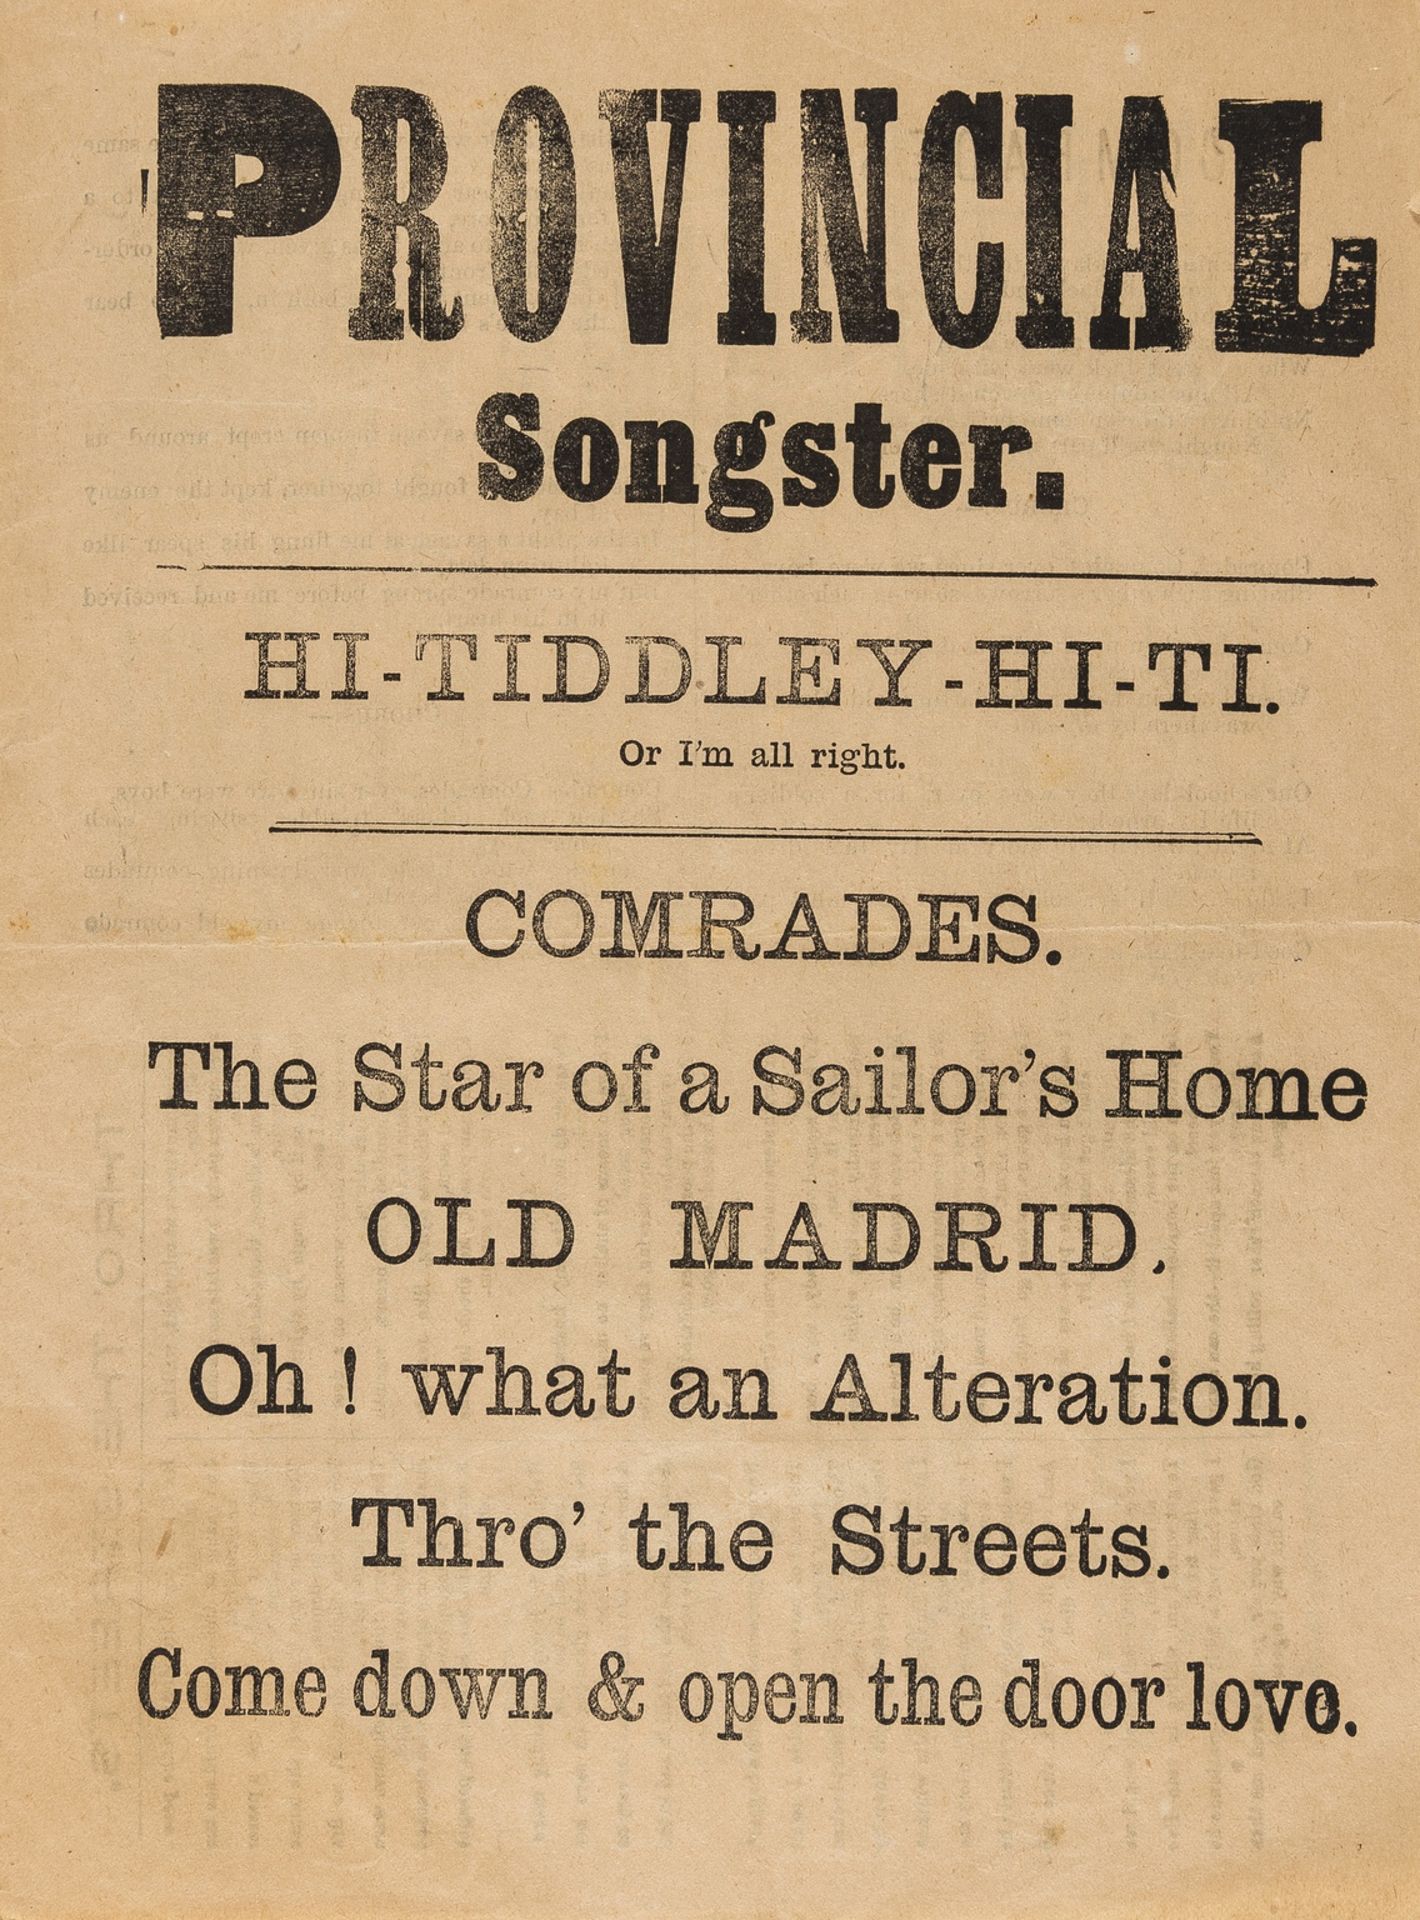 Broadside Ballads.- Provincial Songster, early 20th century. - Image 2 of 2